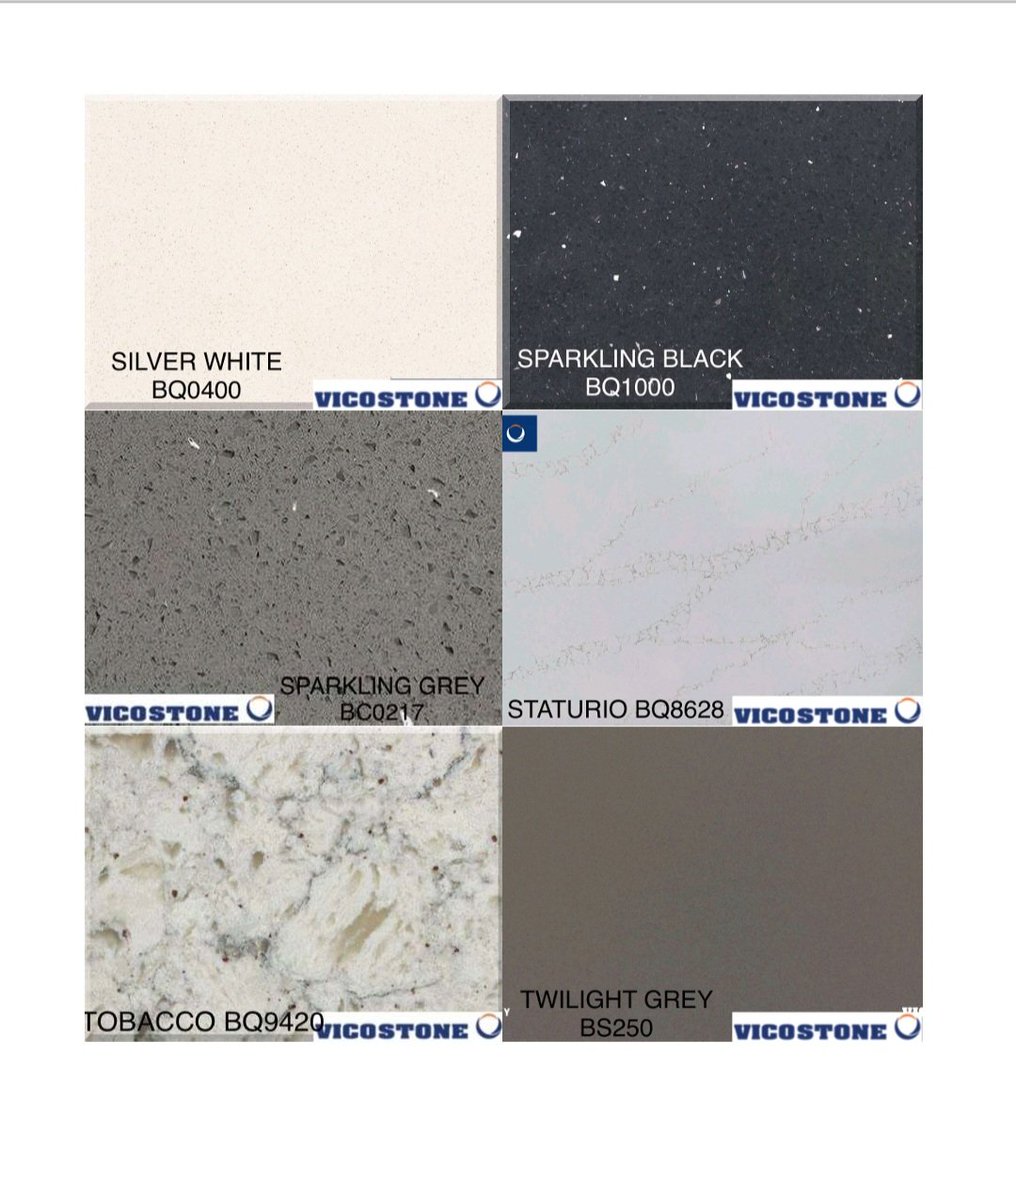 Quite a few colour on sale now - by Vicostone (quartz).

E-mail us today at:
yycgranitecity@gmail.com

#housedesign 
#houserenovation #homeremodel #homerenovation #homedesign #homeimprovement #homeinteriors #kitchendesign #kitchenrenovation #kitchenremodel #kitcheninterior